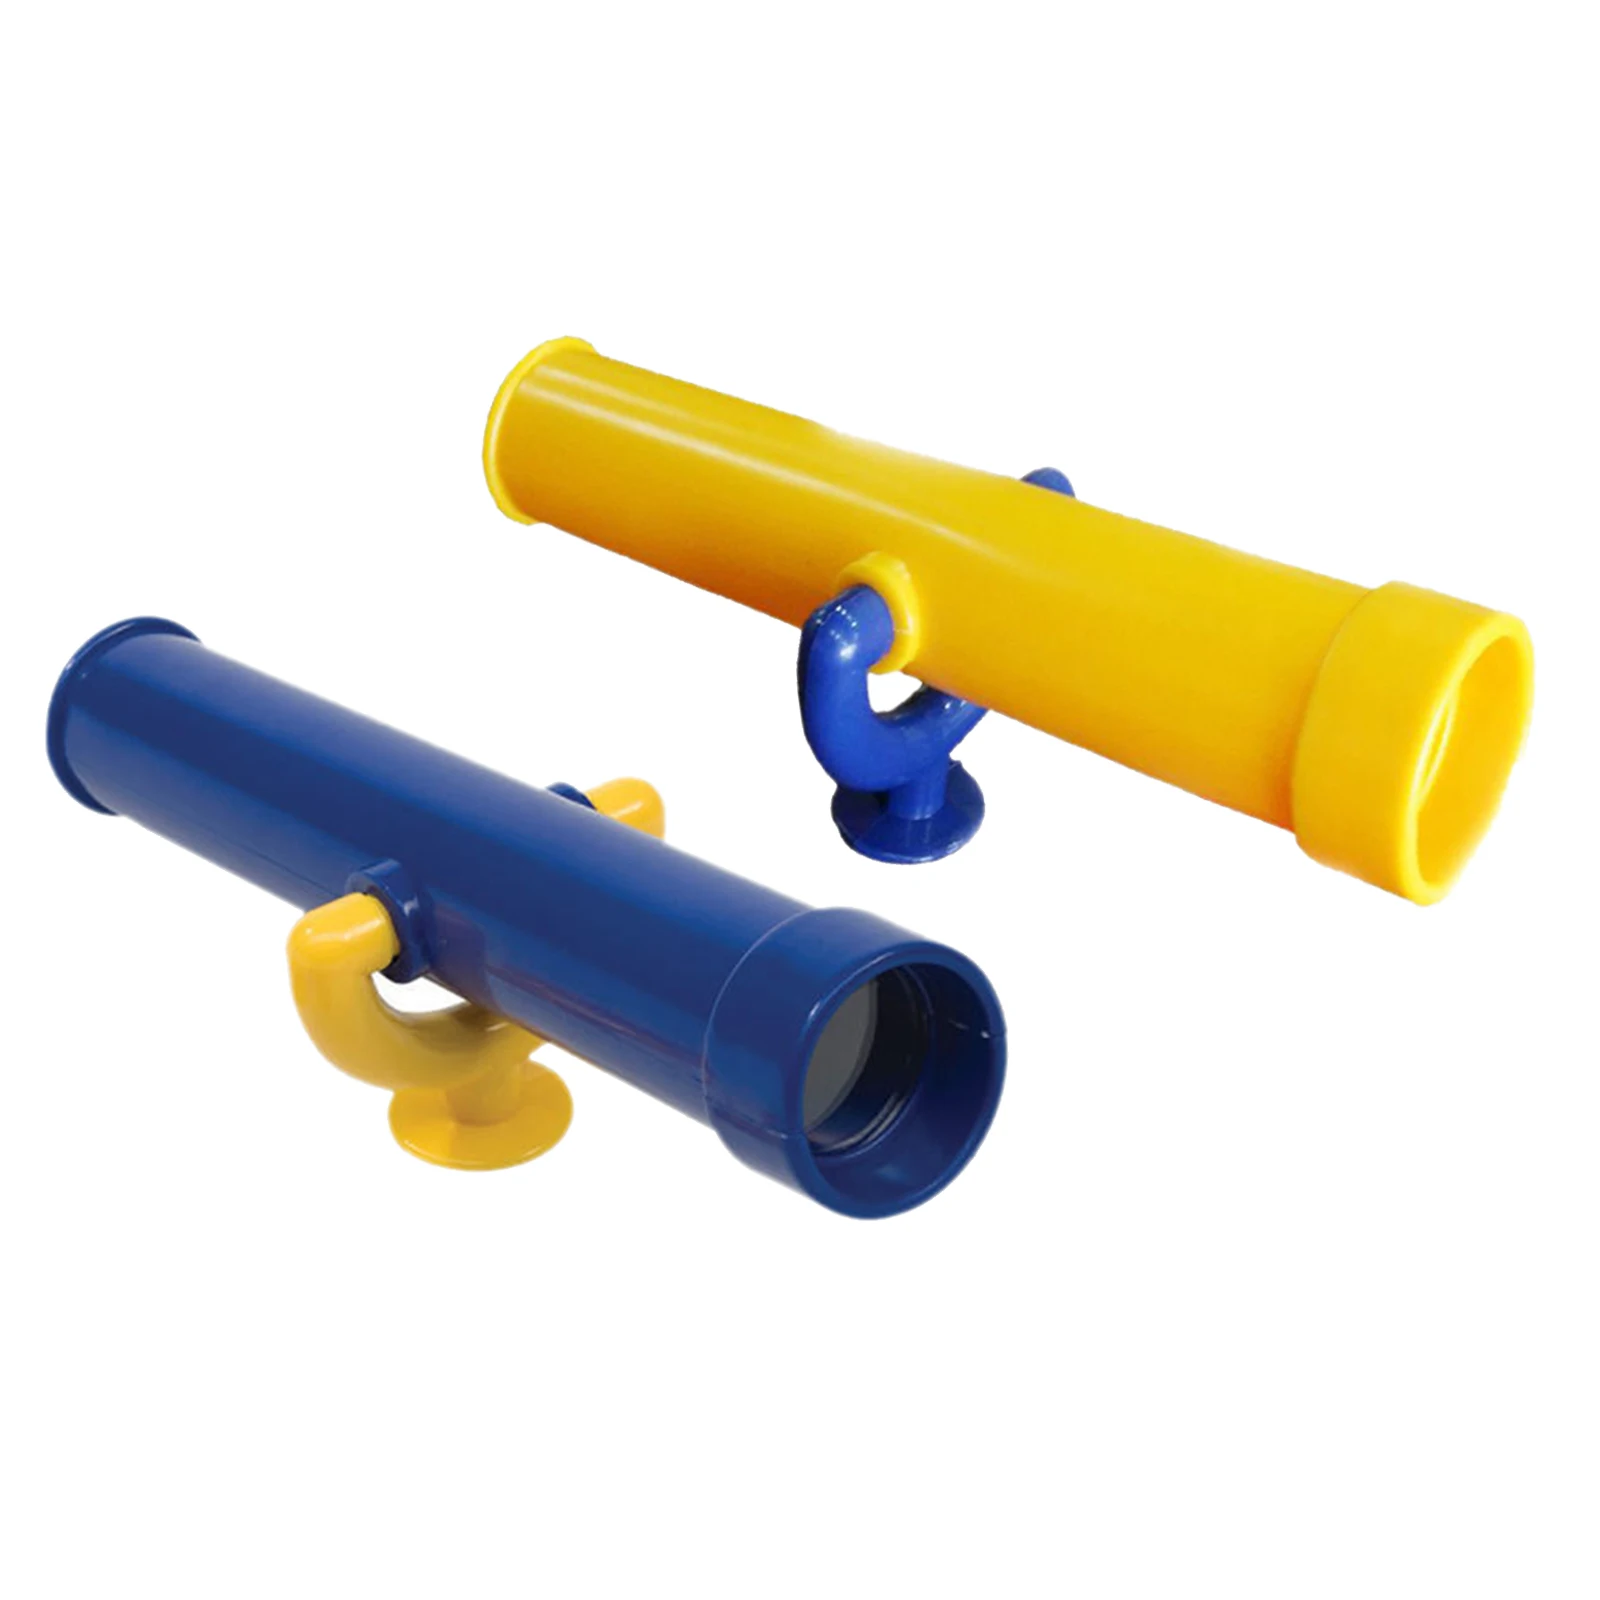 Kids Monocular Telescope Plastic Science Toy Swing Set Accessory for Boys Girls Educational Gift